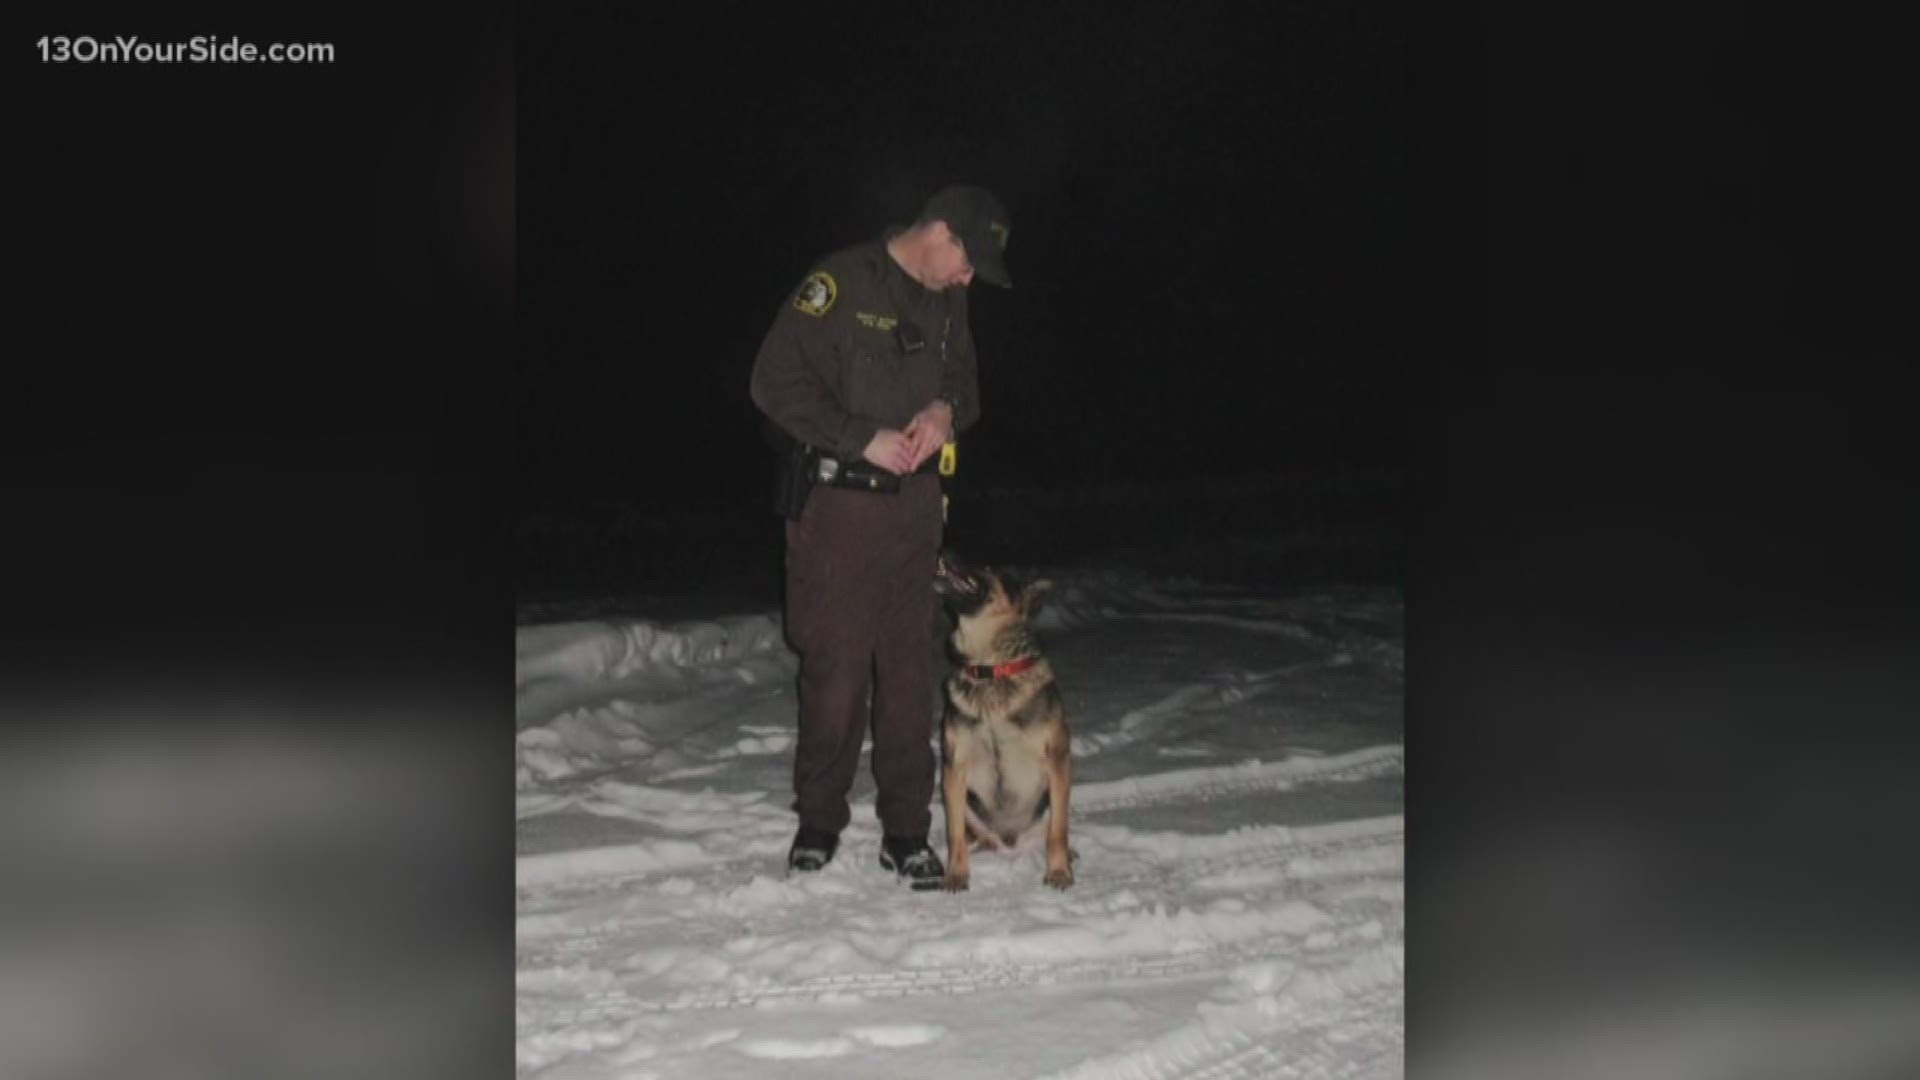 Ionia County Sheriff's Office is mourning the death of its only K9 officer, Dinar, who was a German Shepherd born in the Netherlands. He died on Jan. 31.